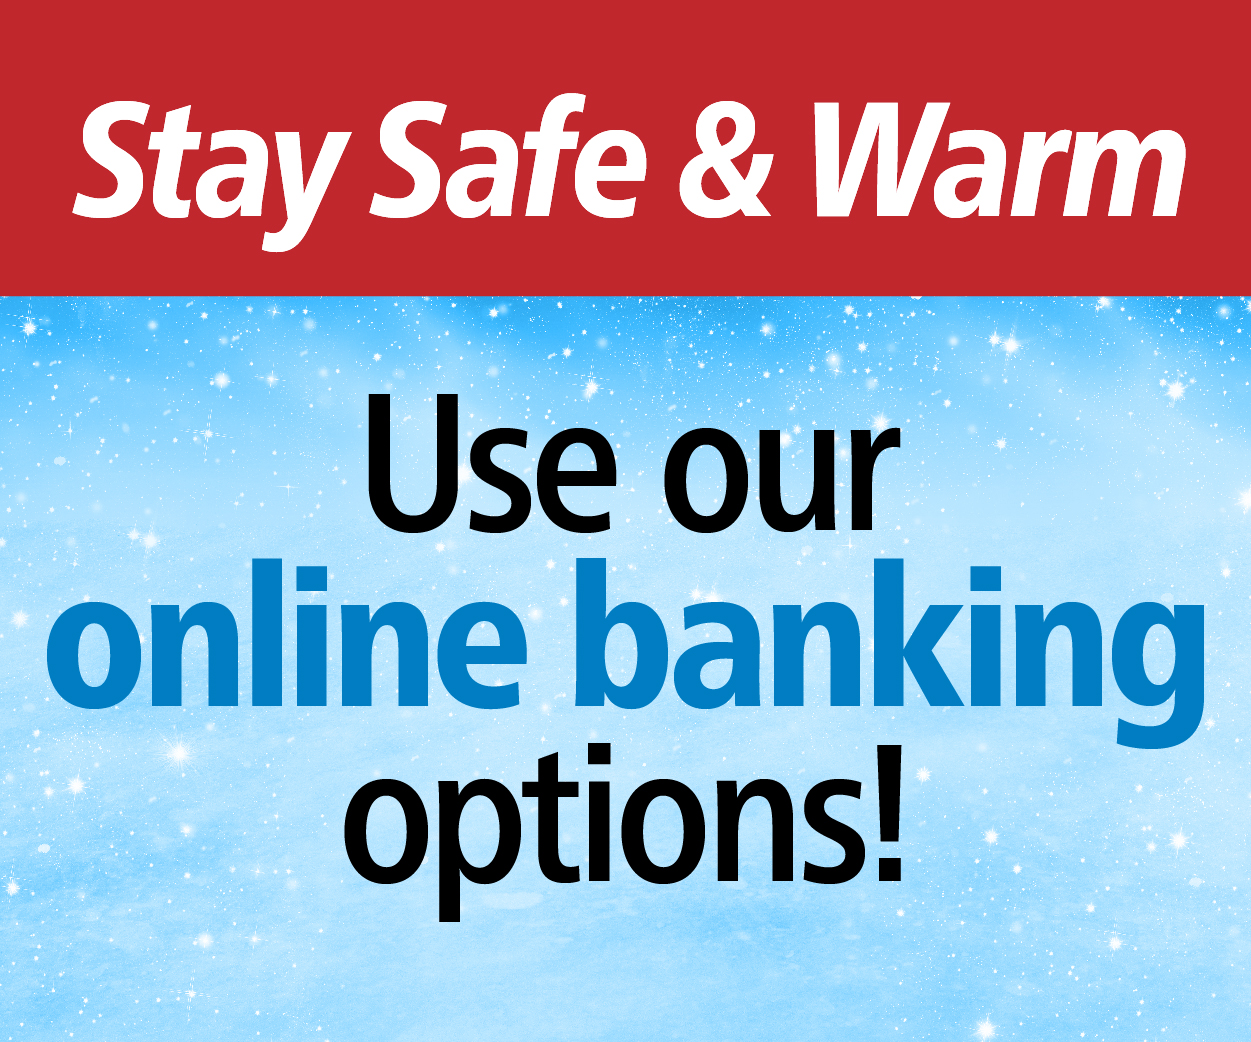 Stay safe & warm, use your online banking options